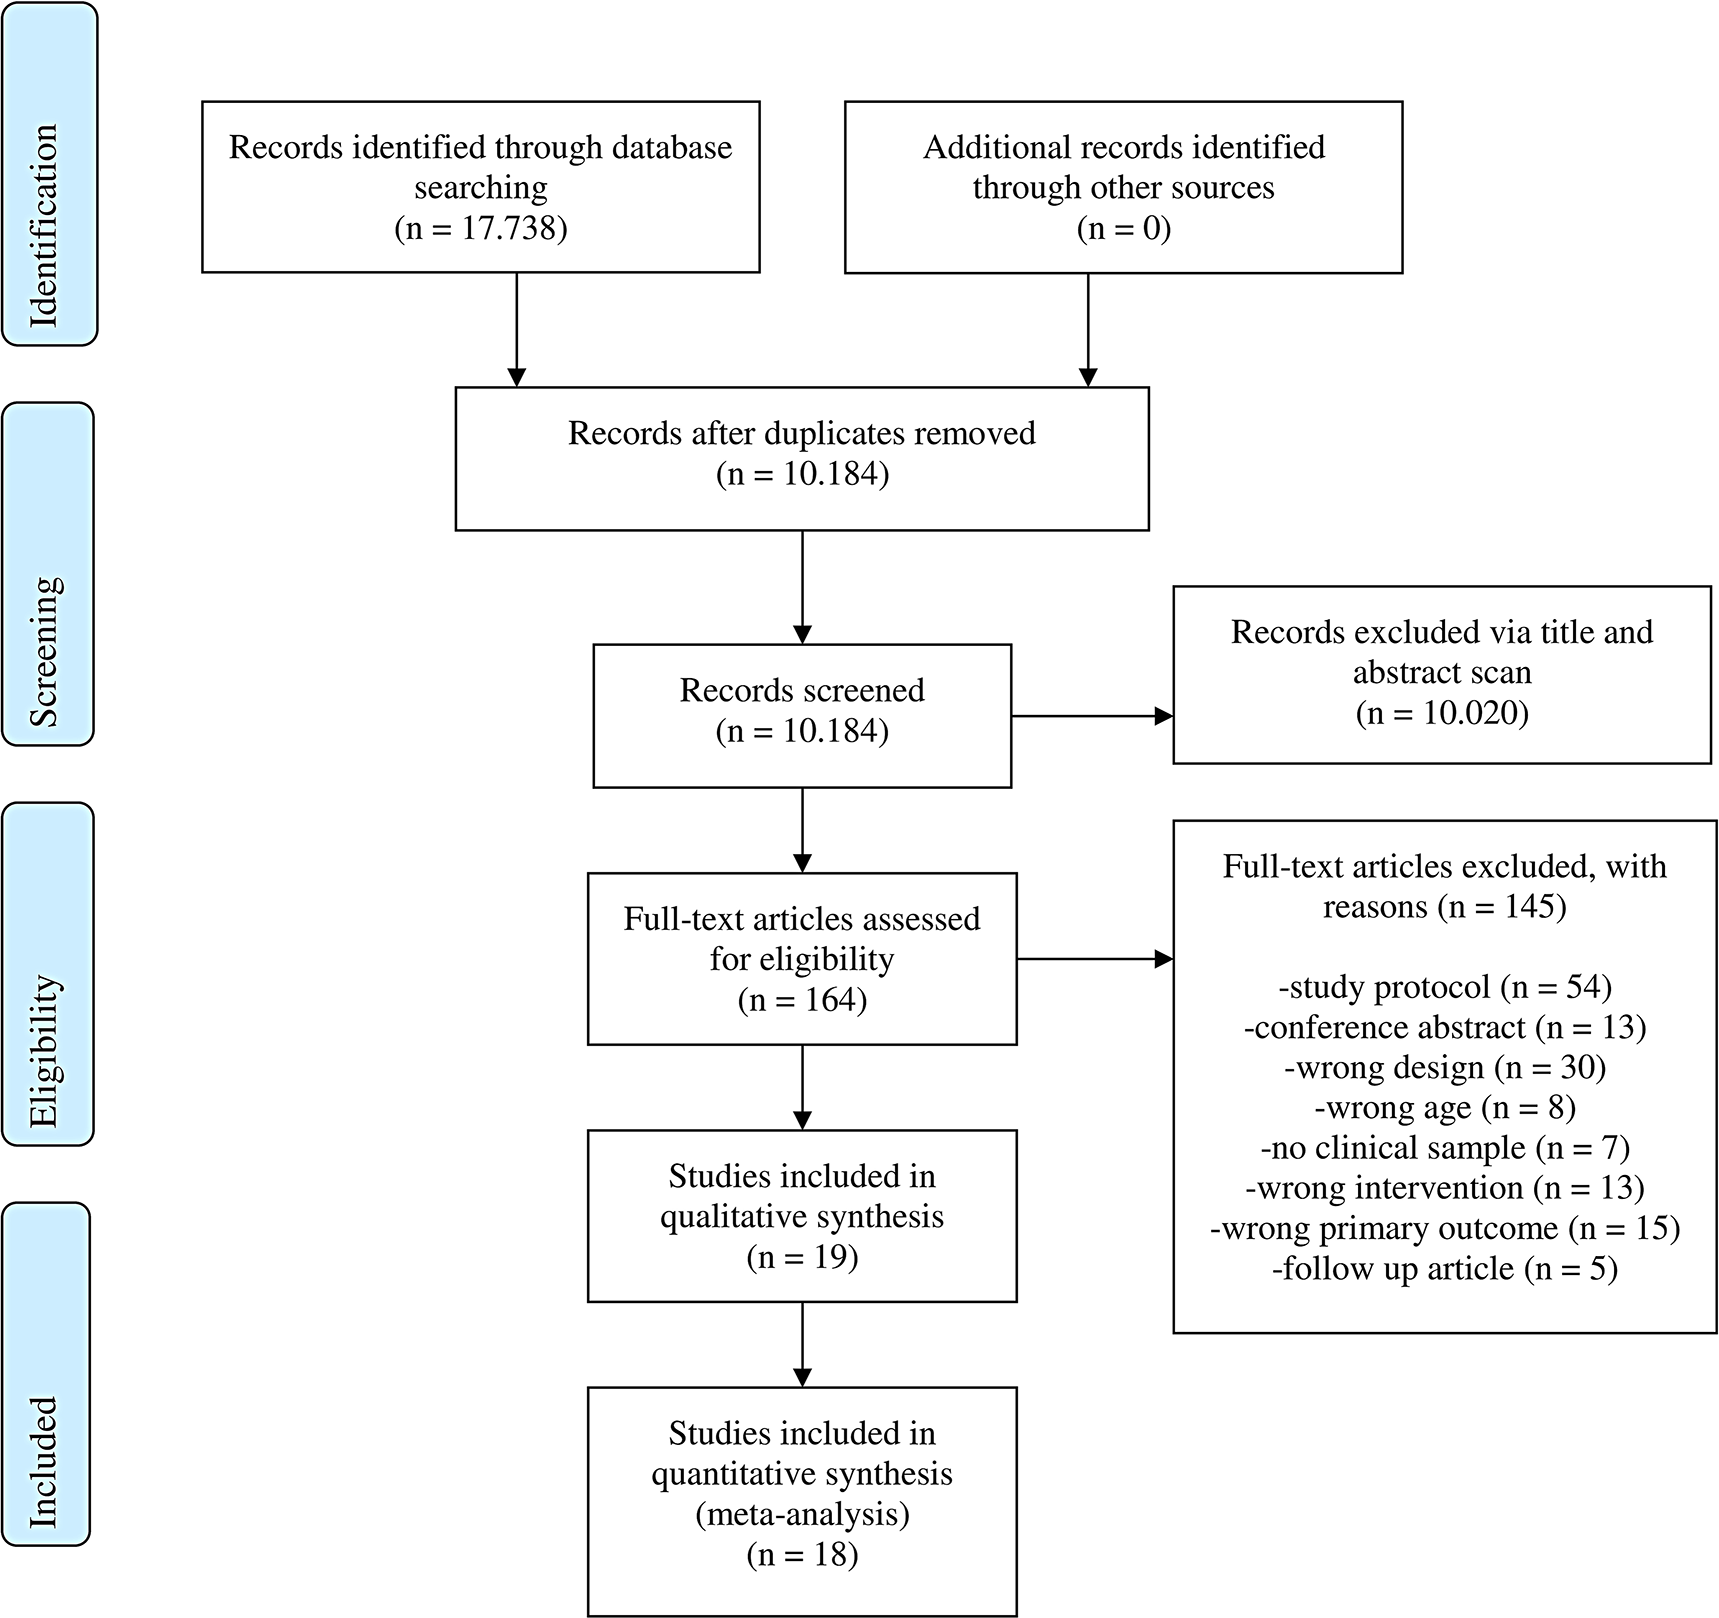 Internet- and mobile-based anxiety and depression interventions for children and adolescents: efficacy and negative effects - a systematic review and meta-analysis